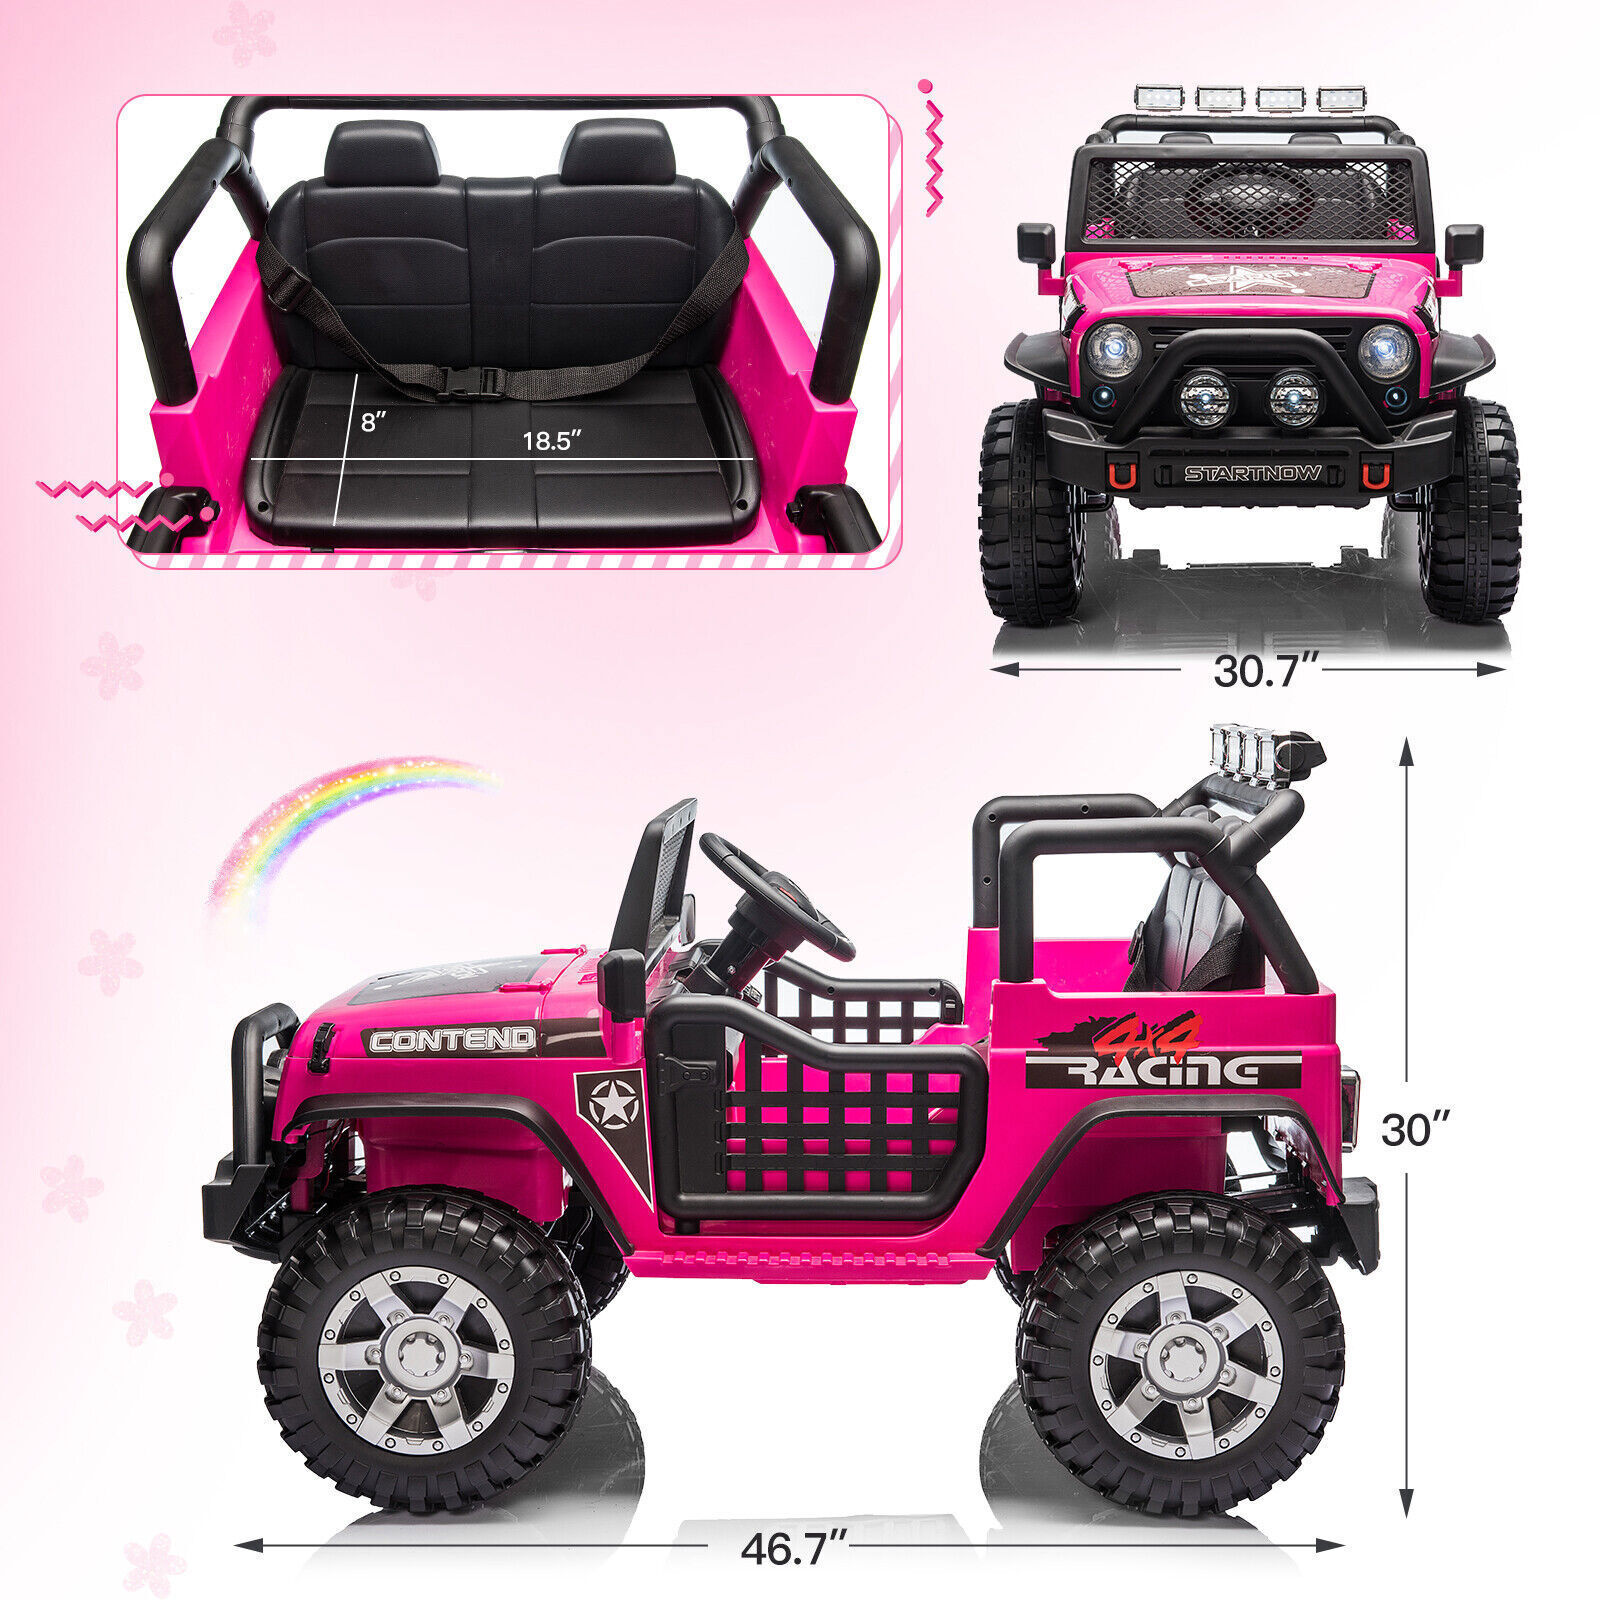 Dazone 12V Kids Ride on Jeep Car, Electric 2 Seats Off-road Jeep Ride on Truck Vehicle with Remote Control, LED Lights, MP3 Music, Pink - image 5 of 8